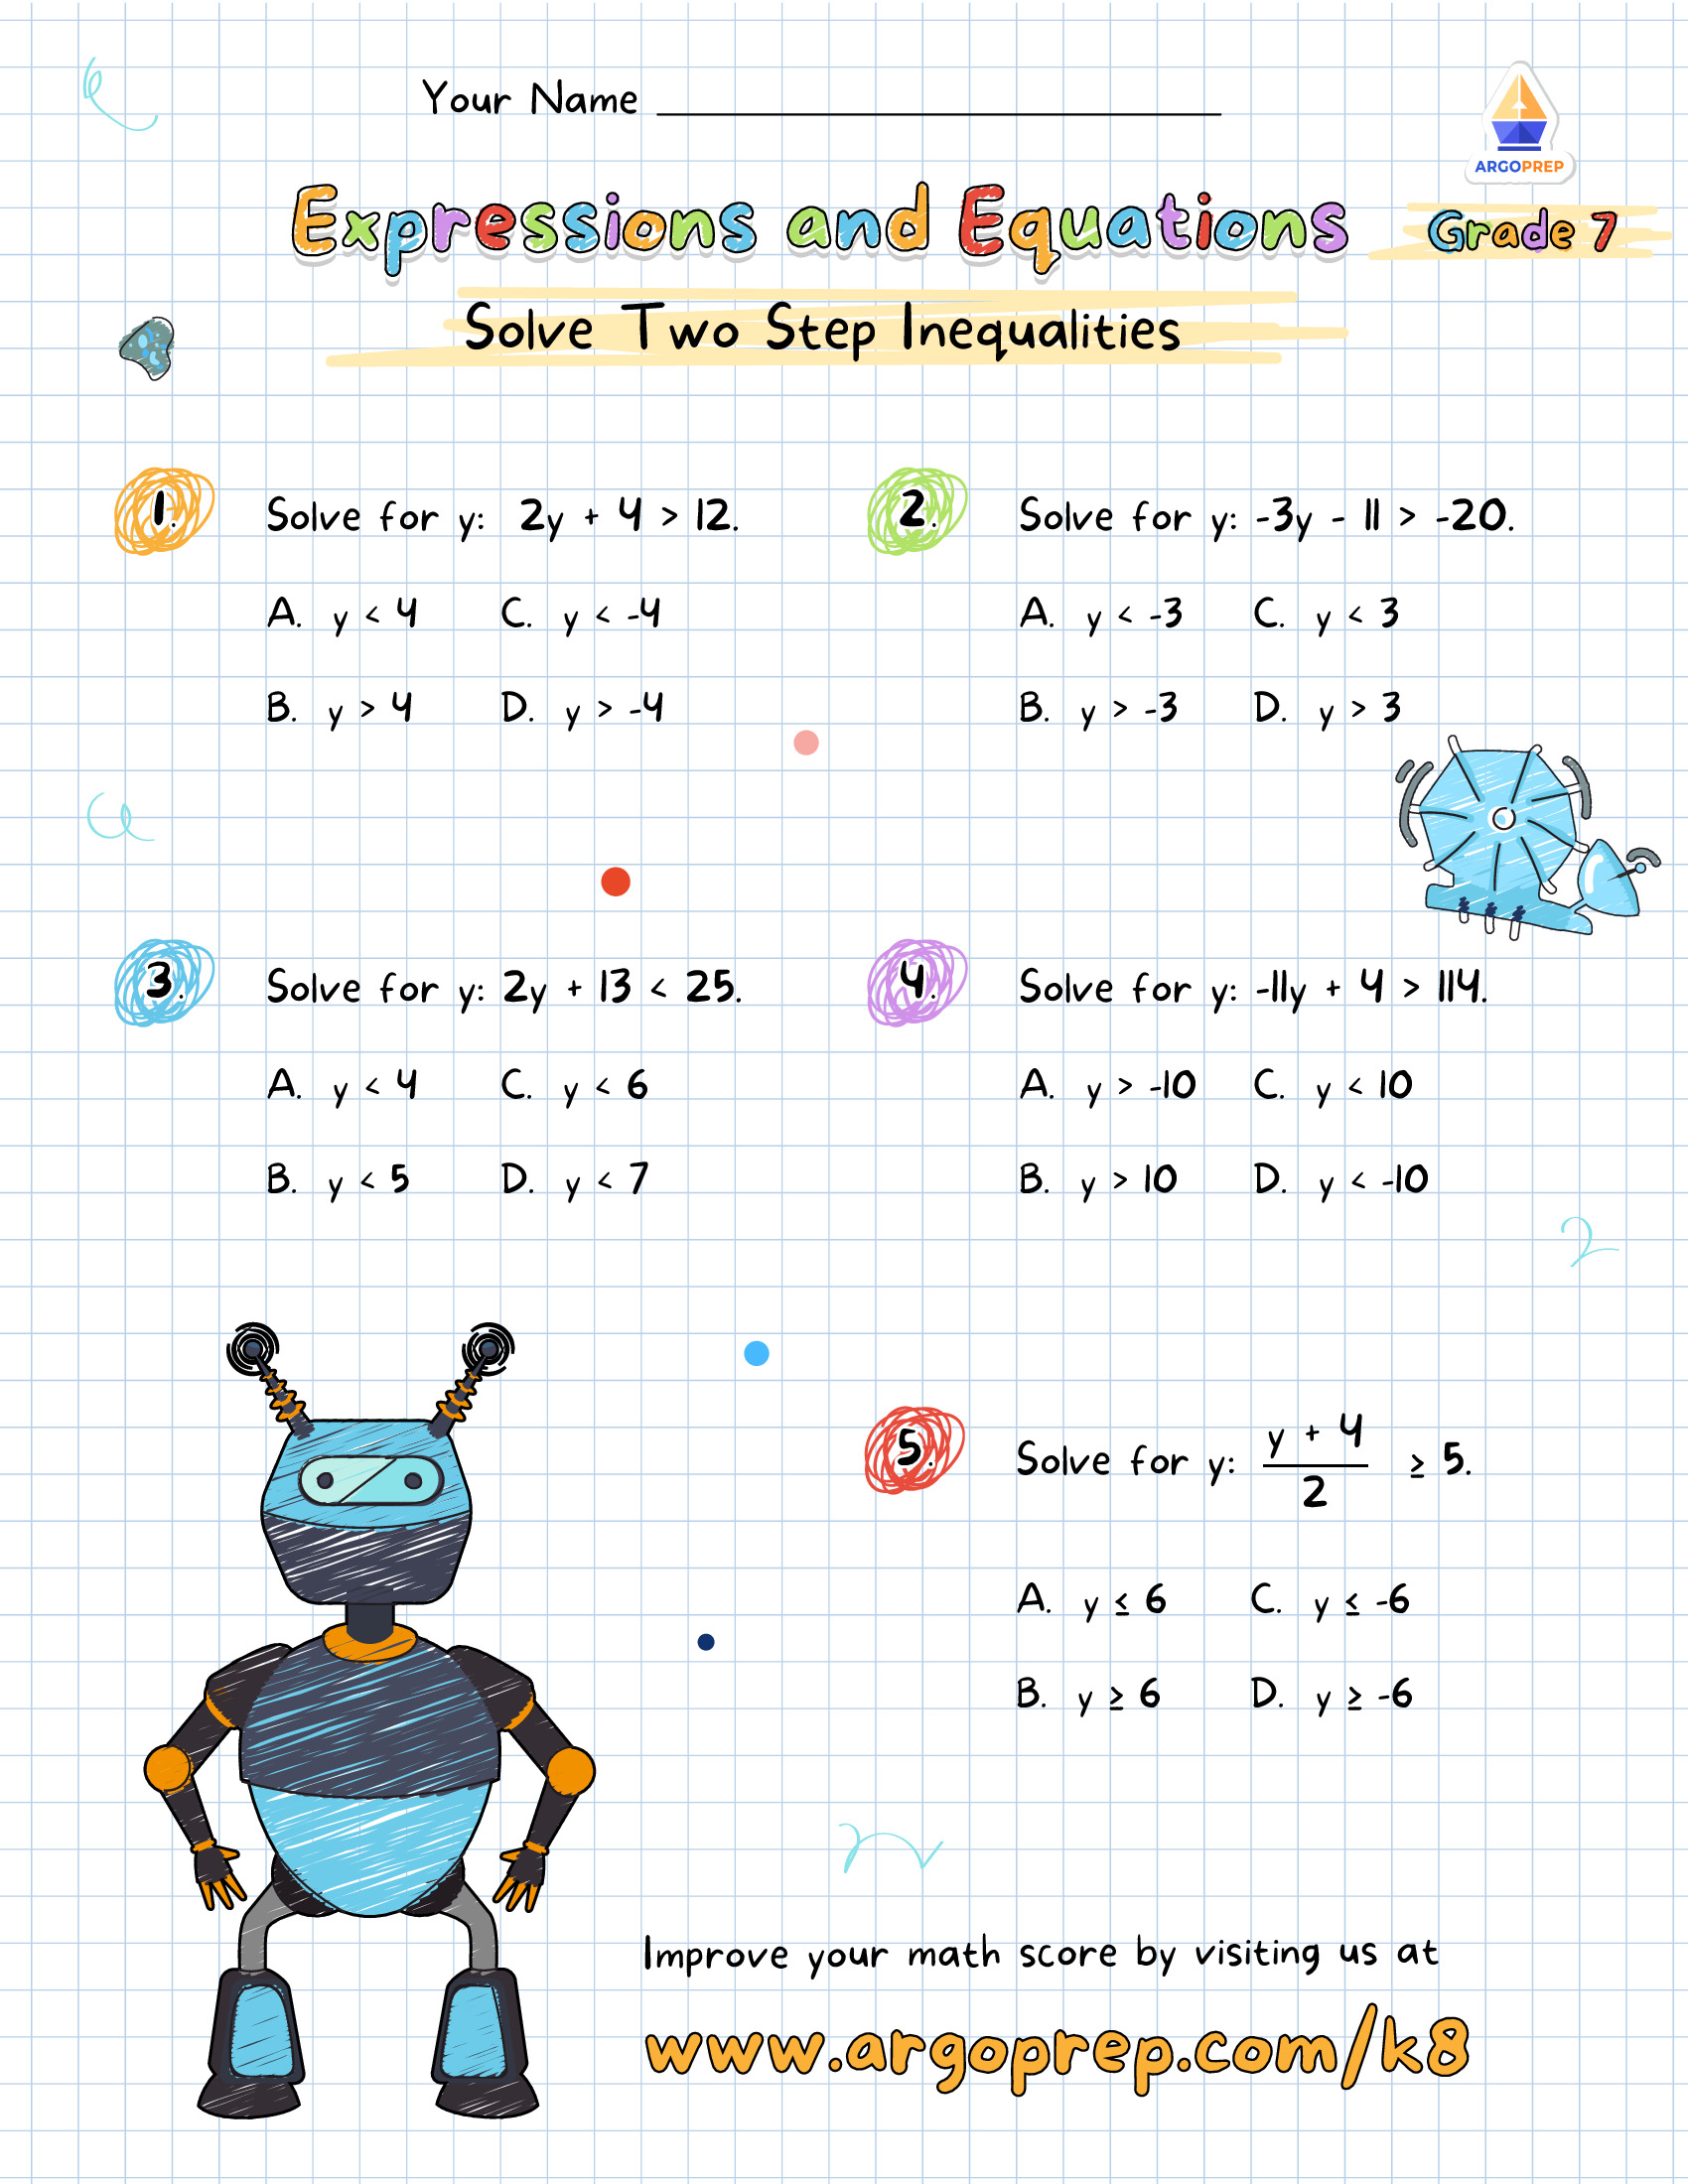 Robot Ready for Two Step Inequalities - ArgoPrep Within Two Step Inequalities Worksheet